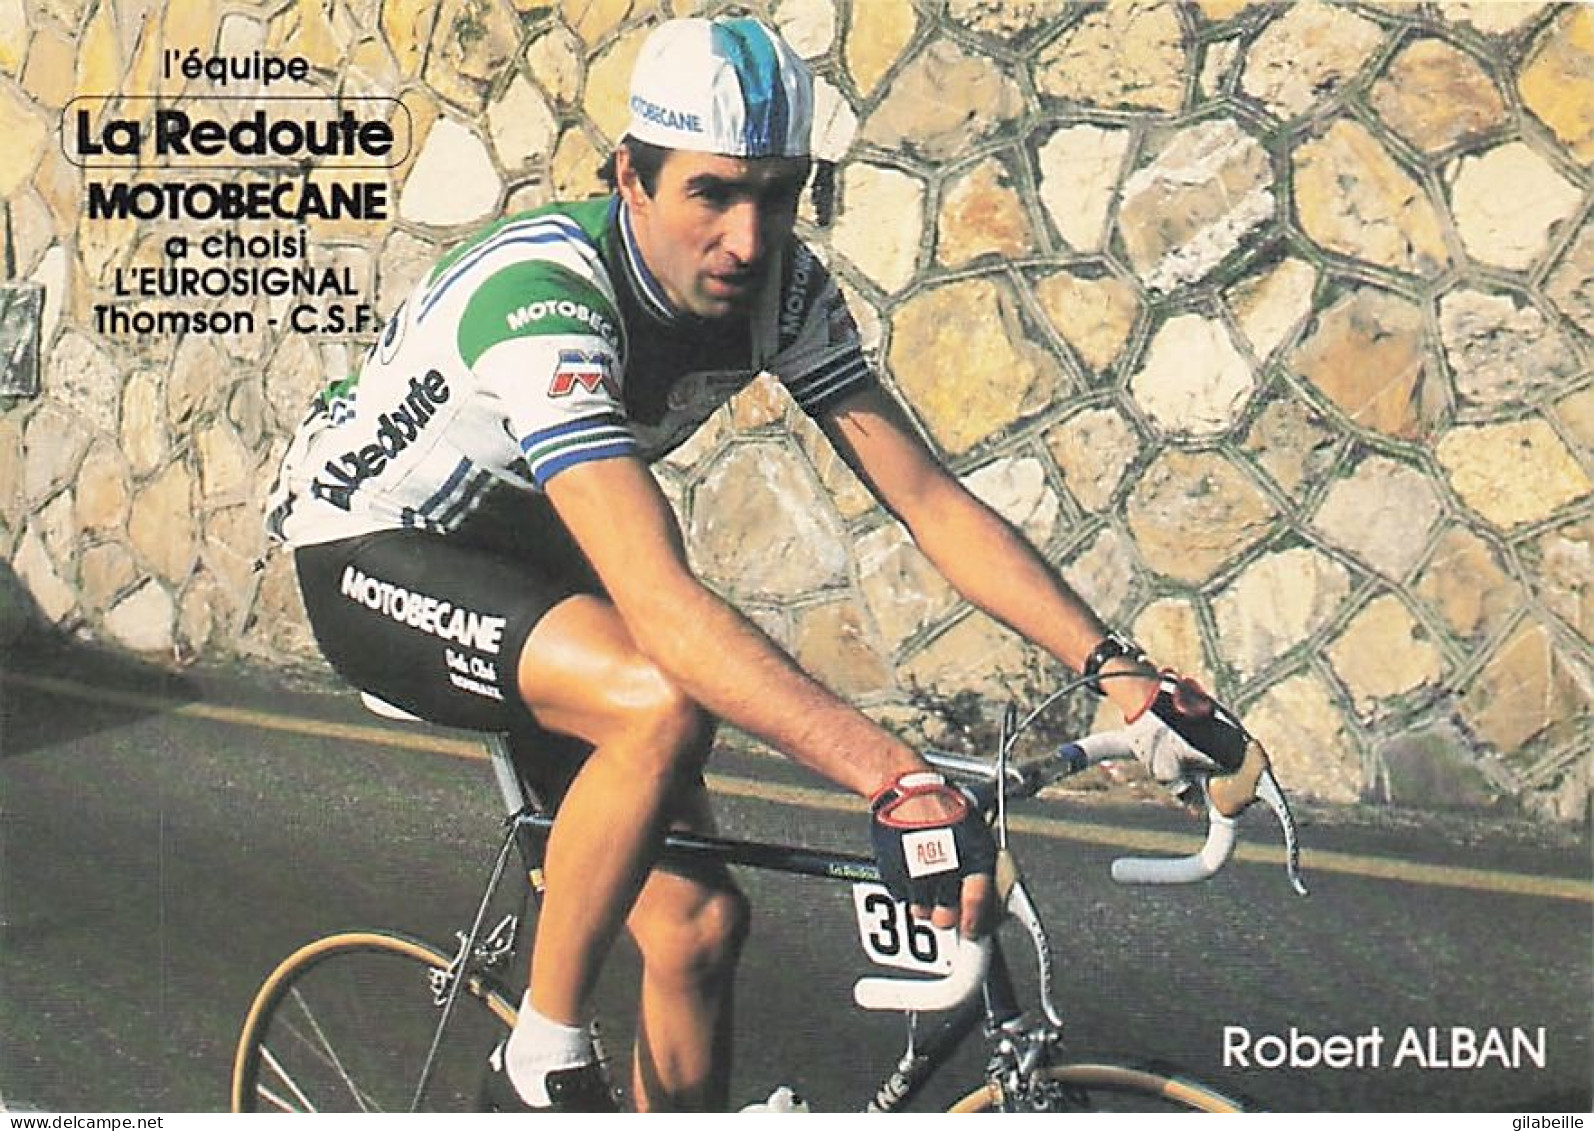 Vélo Coureur Cycliste Francais Robert Alban - Team La Redoute - Cycling - Cyclisme - Ciclismo - Wielrennen  - Wielrennen